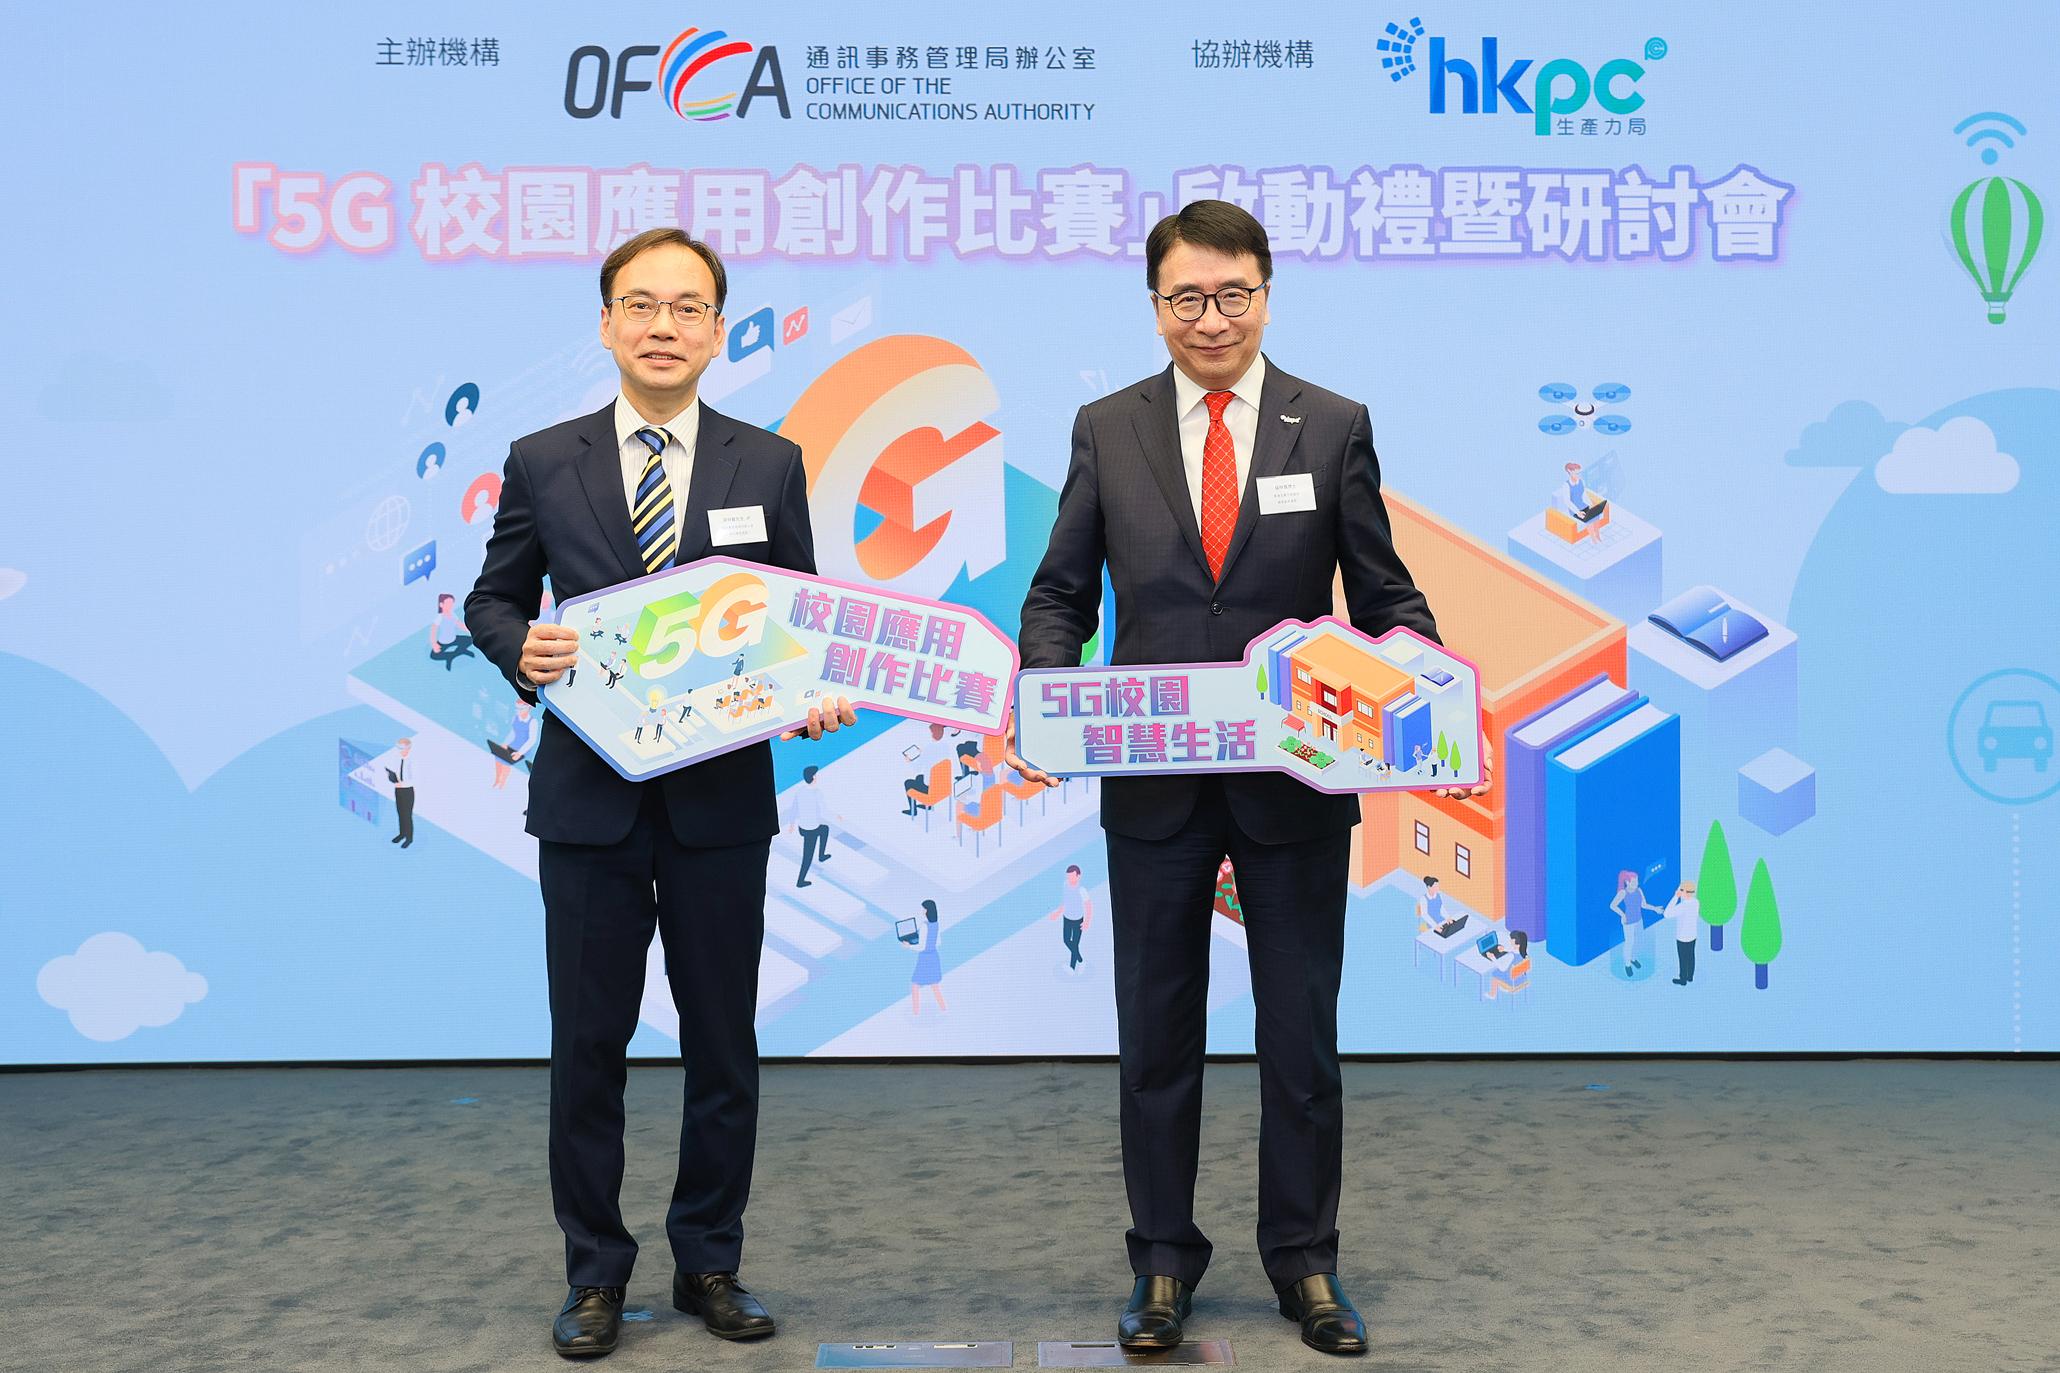 The Office of the Communications Authority held the Kick-off Seminar of the "5G Campus Application Competition" today (May 20). Photo shows the Director-General of Communications, Mr Chaucer Leung (left), and the Chief Innovation Officer of the Hong Kong Productivity Council, Dr Lawrence Cheung (right), officiating at the launching ceremony.